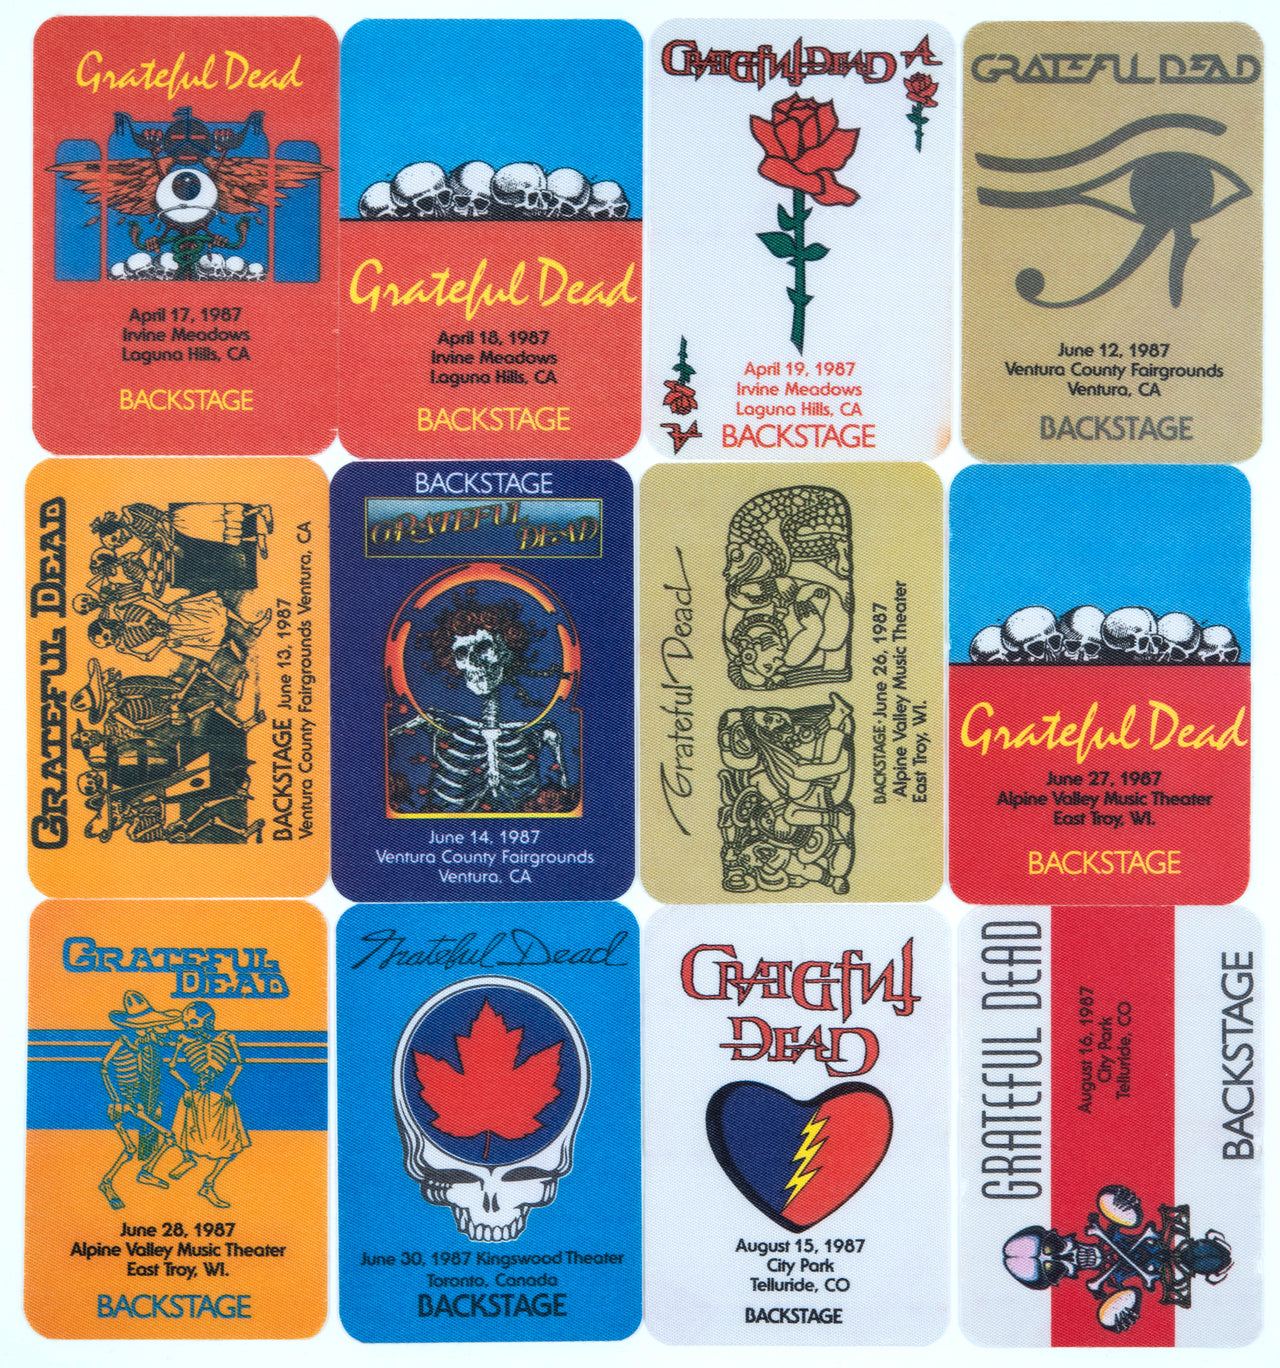 Grateful Dead Backstage Passes (4/17/1987 - 8/16/1987) from Dan Healy